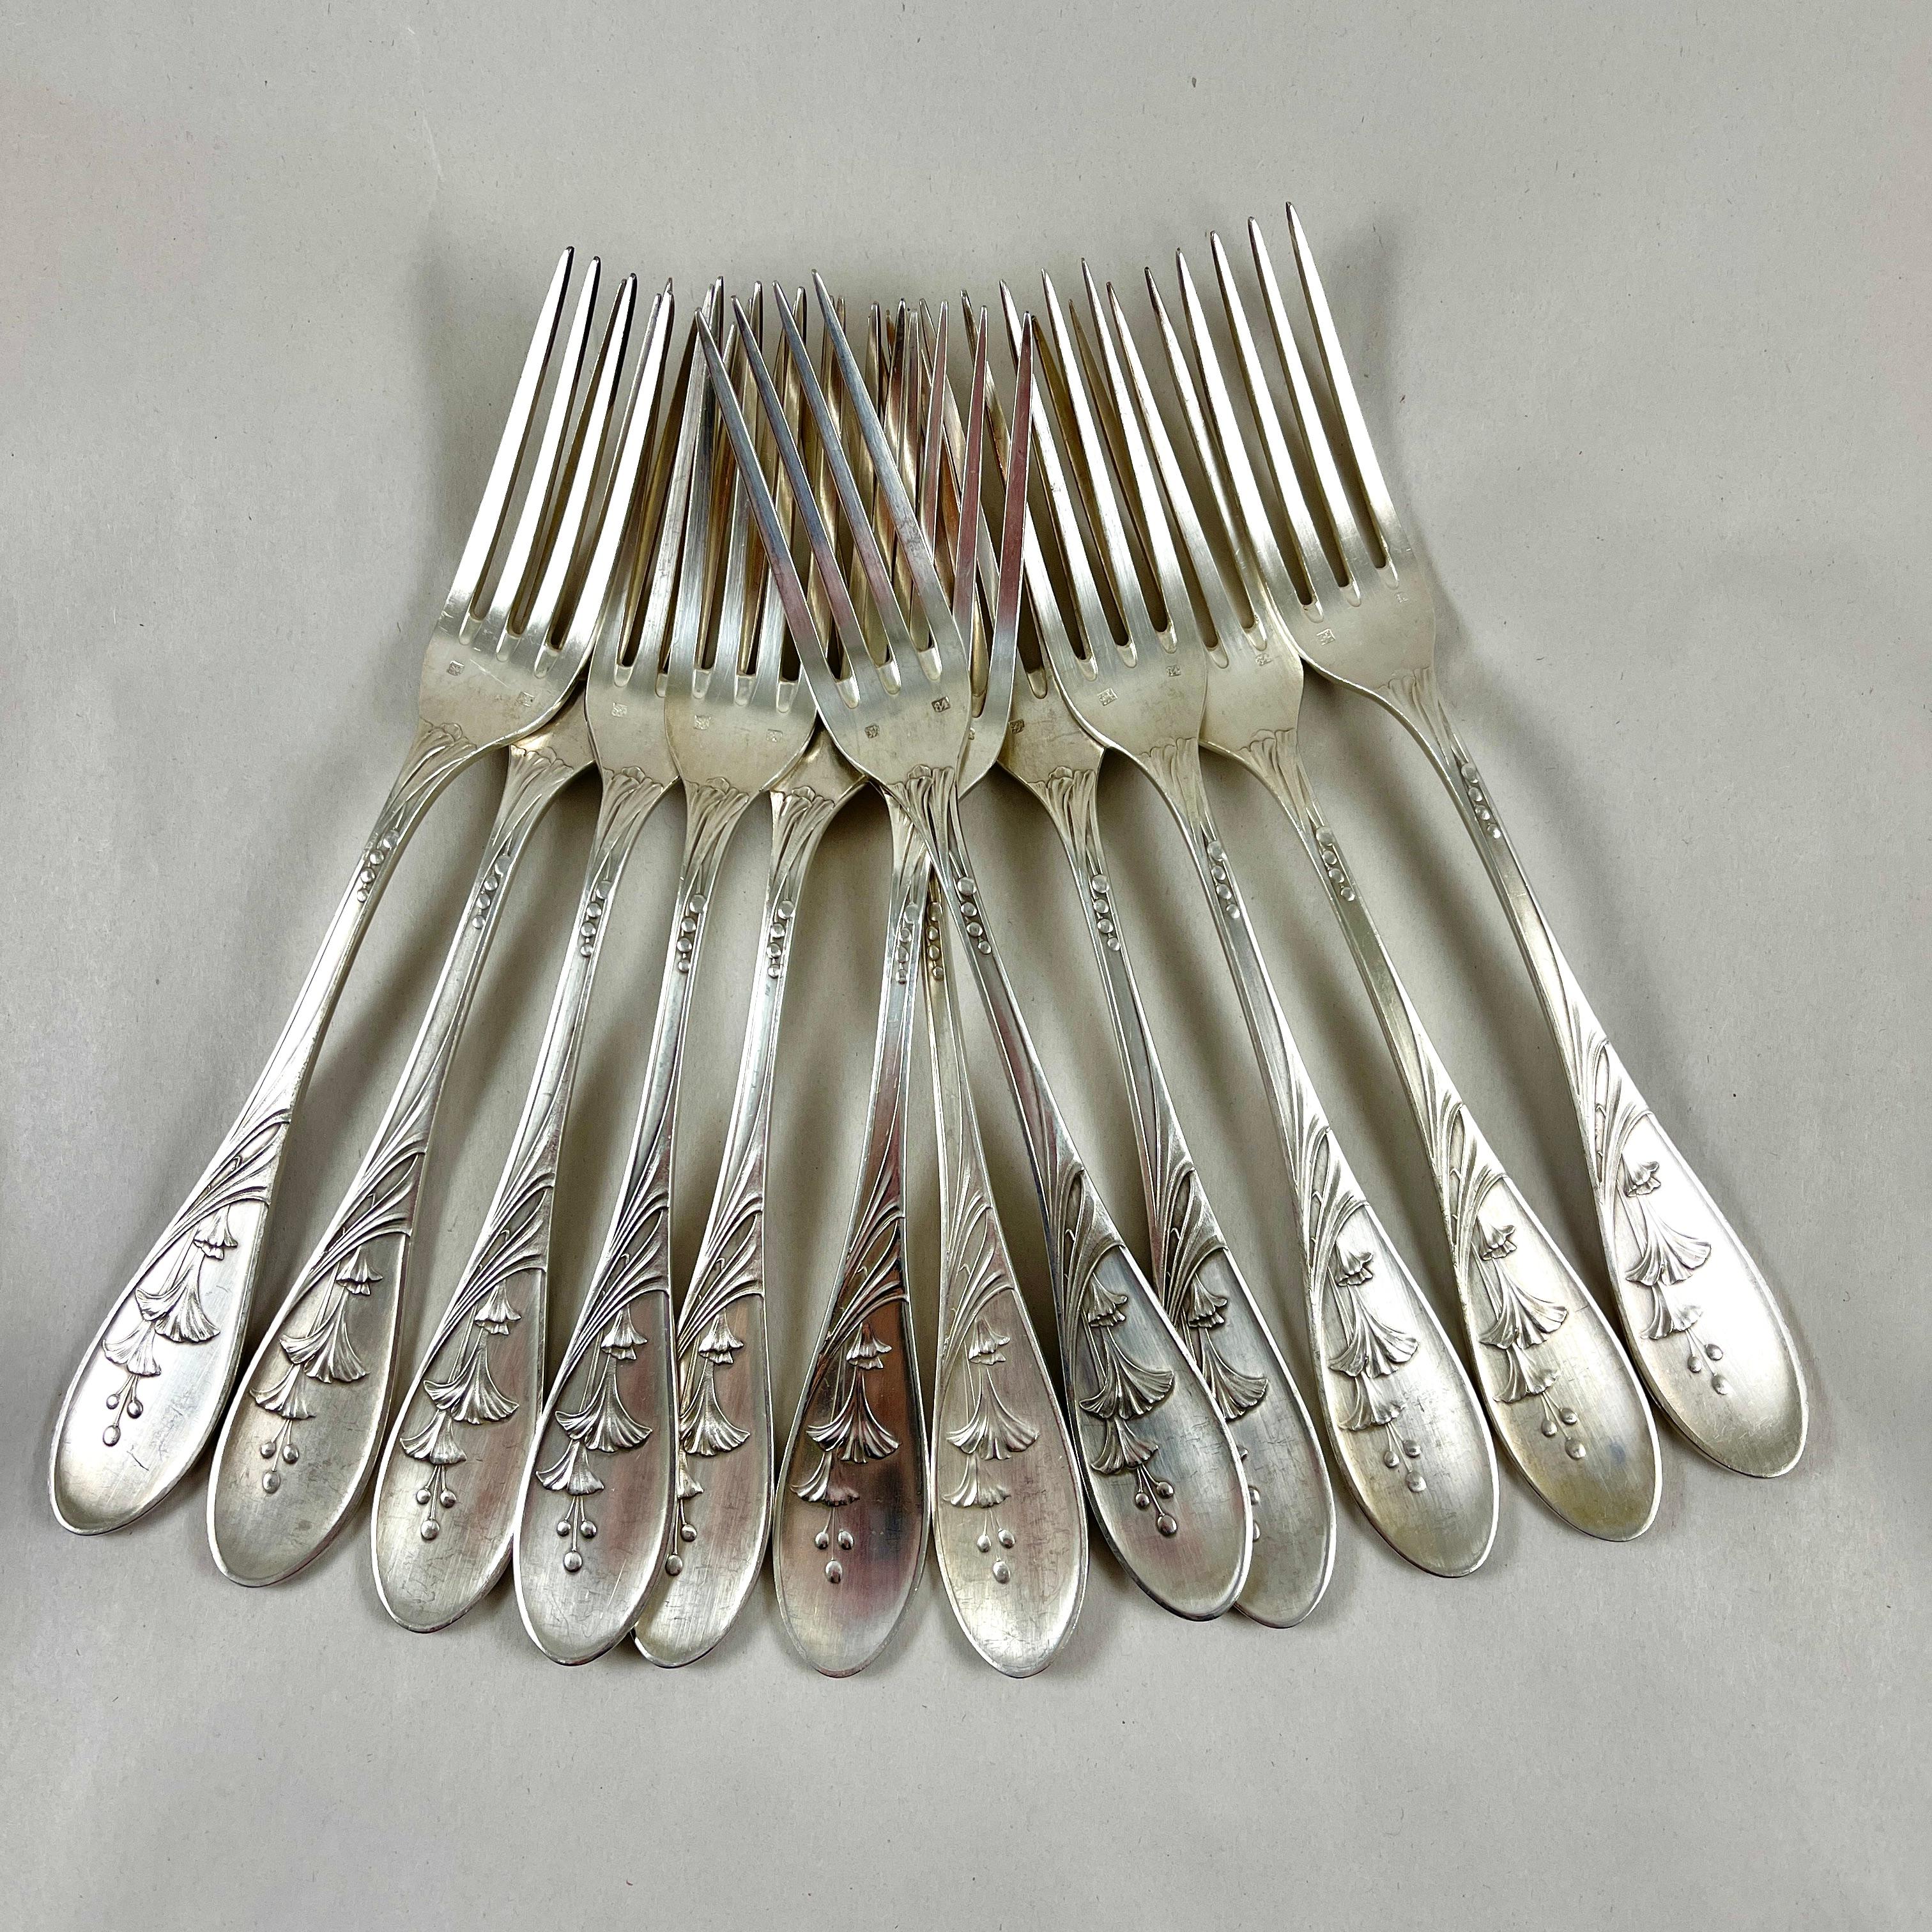 Early 20th Century Saglier Frères Oversized French Art Nouveau Floral Table Forks & Spoons, S/24 For Sale